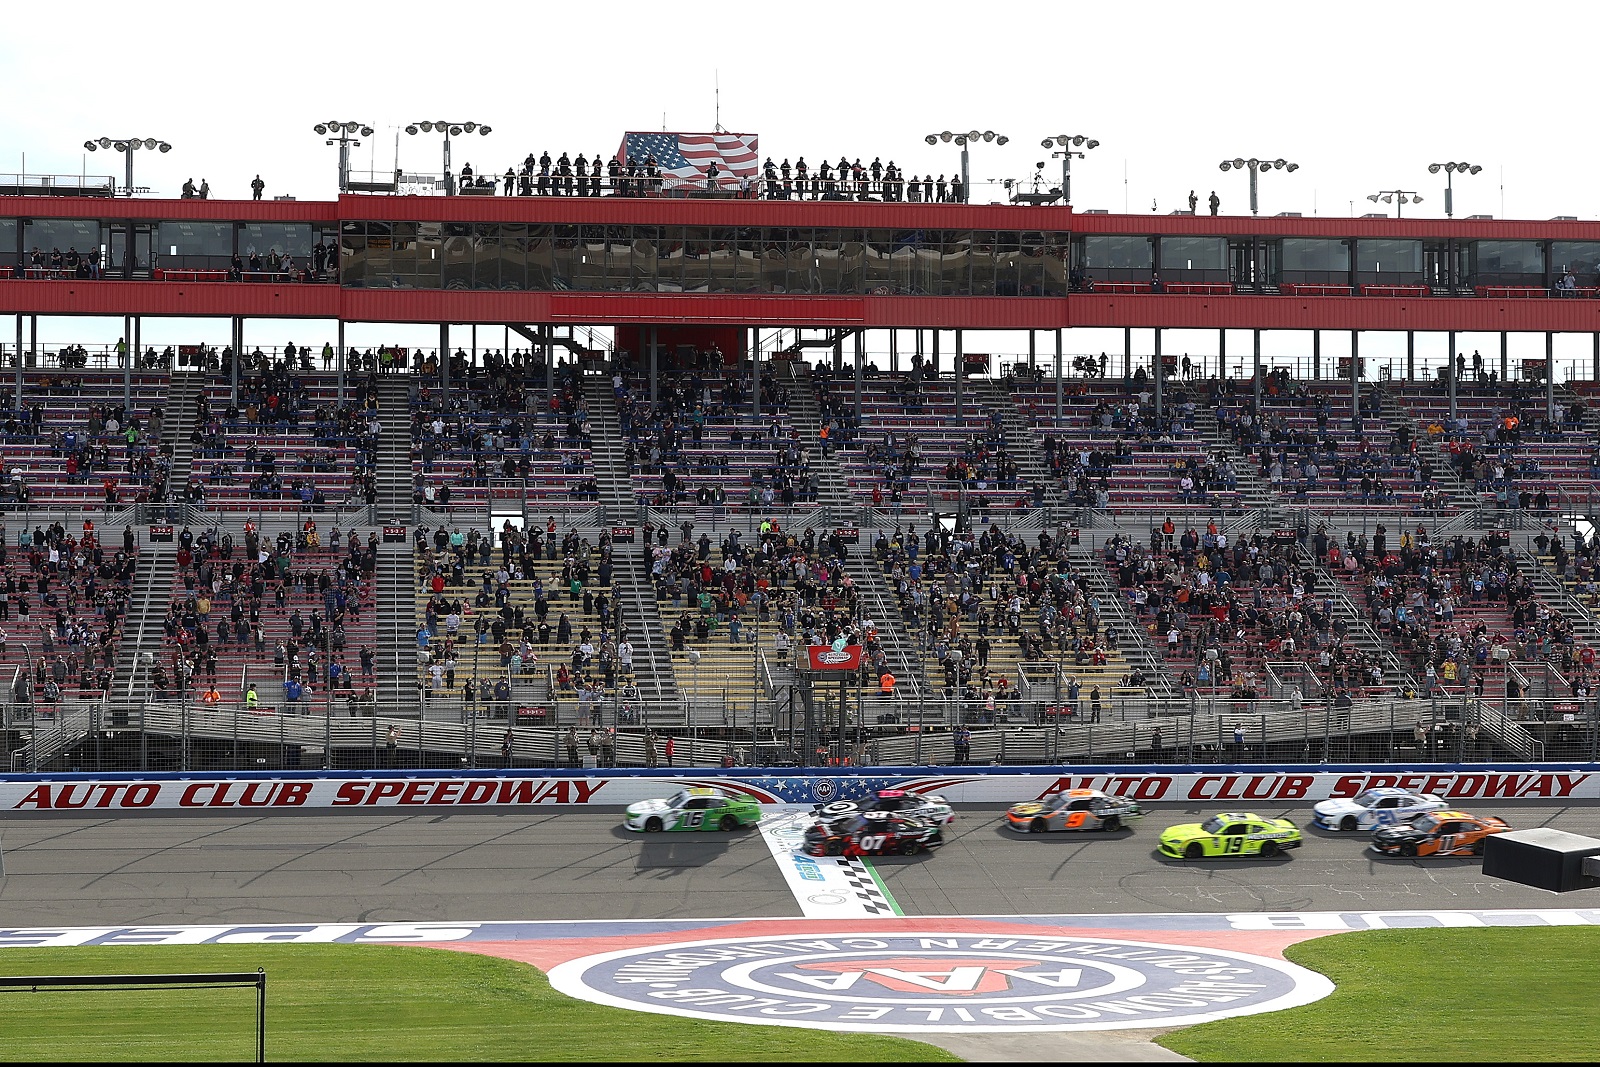 AJ Allmendinger, driver of the No. 16 Chevrolet, leads the field to start the NASCAR Xfinity Series Production Alliance 300 at Auto Club Speedway on Feb. 26, 2022 in Fontana, California. | James Gilbert/Getty Images